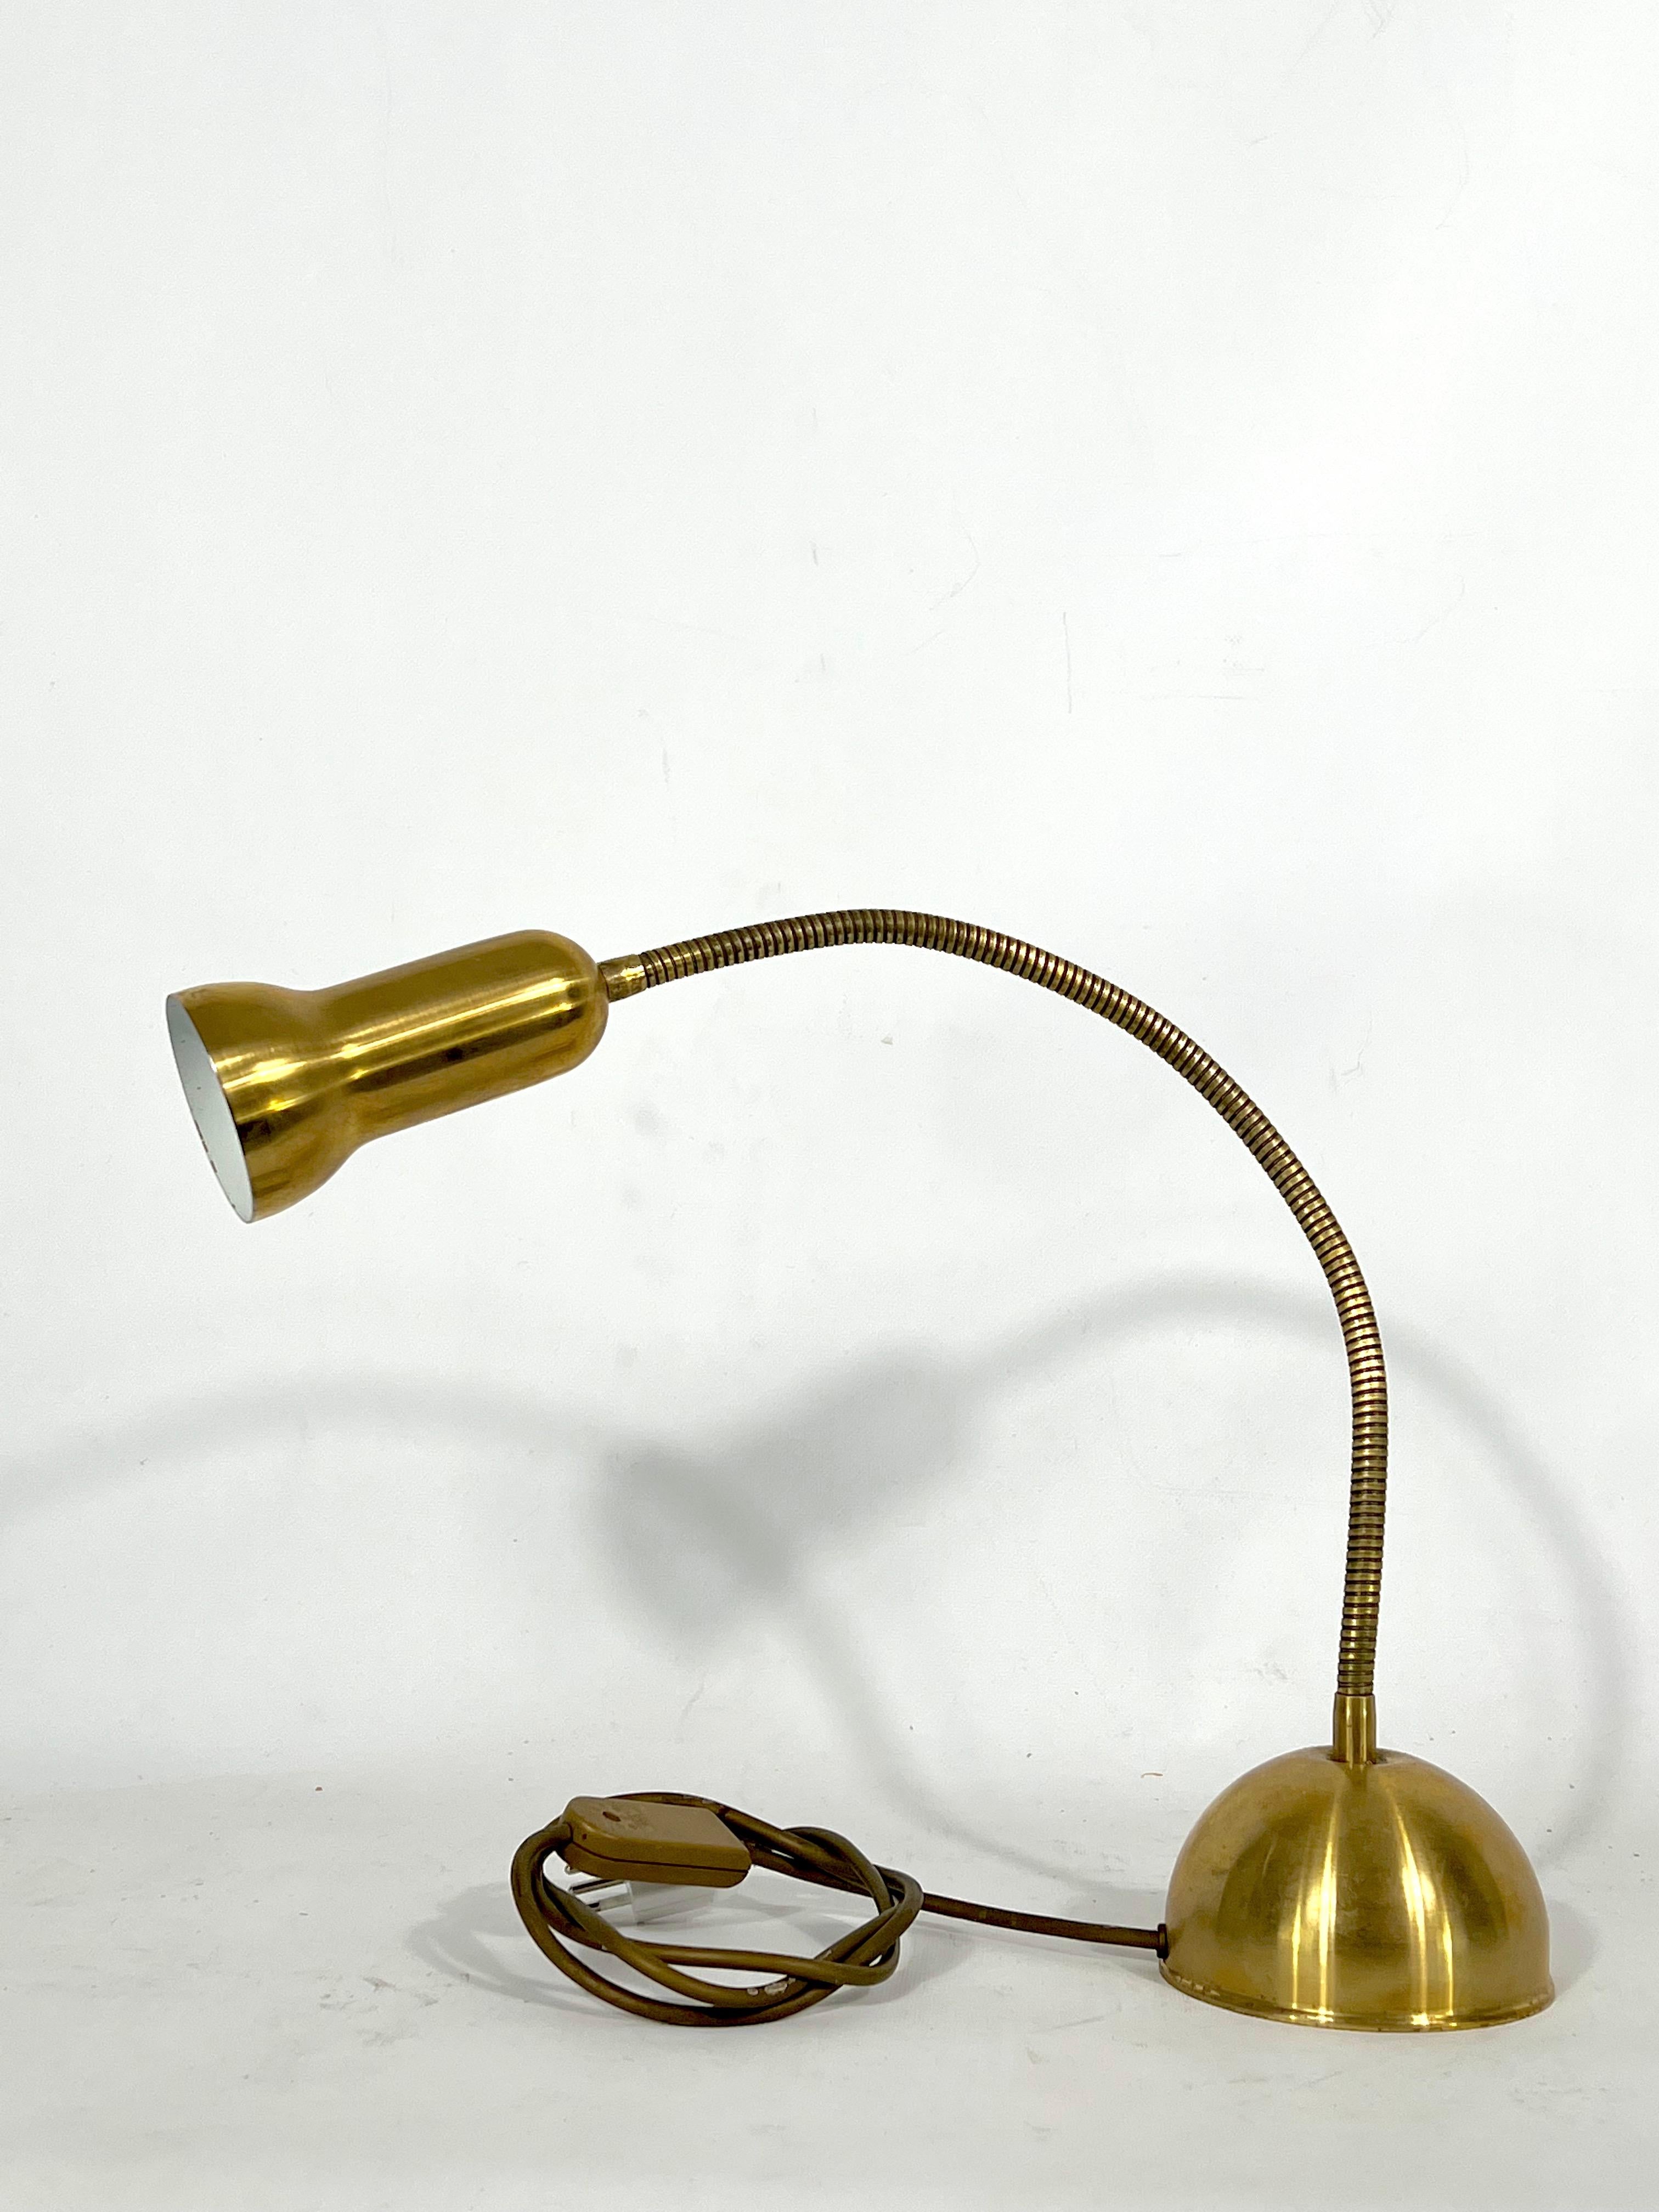 Very good vintage condition with normal trace of age and use for this lamp made from brass and produced in Italy during the 60s. Full working with EU standard, adaptable on demand for USA standard.